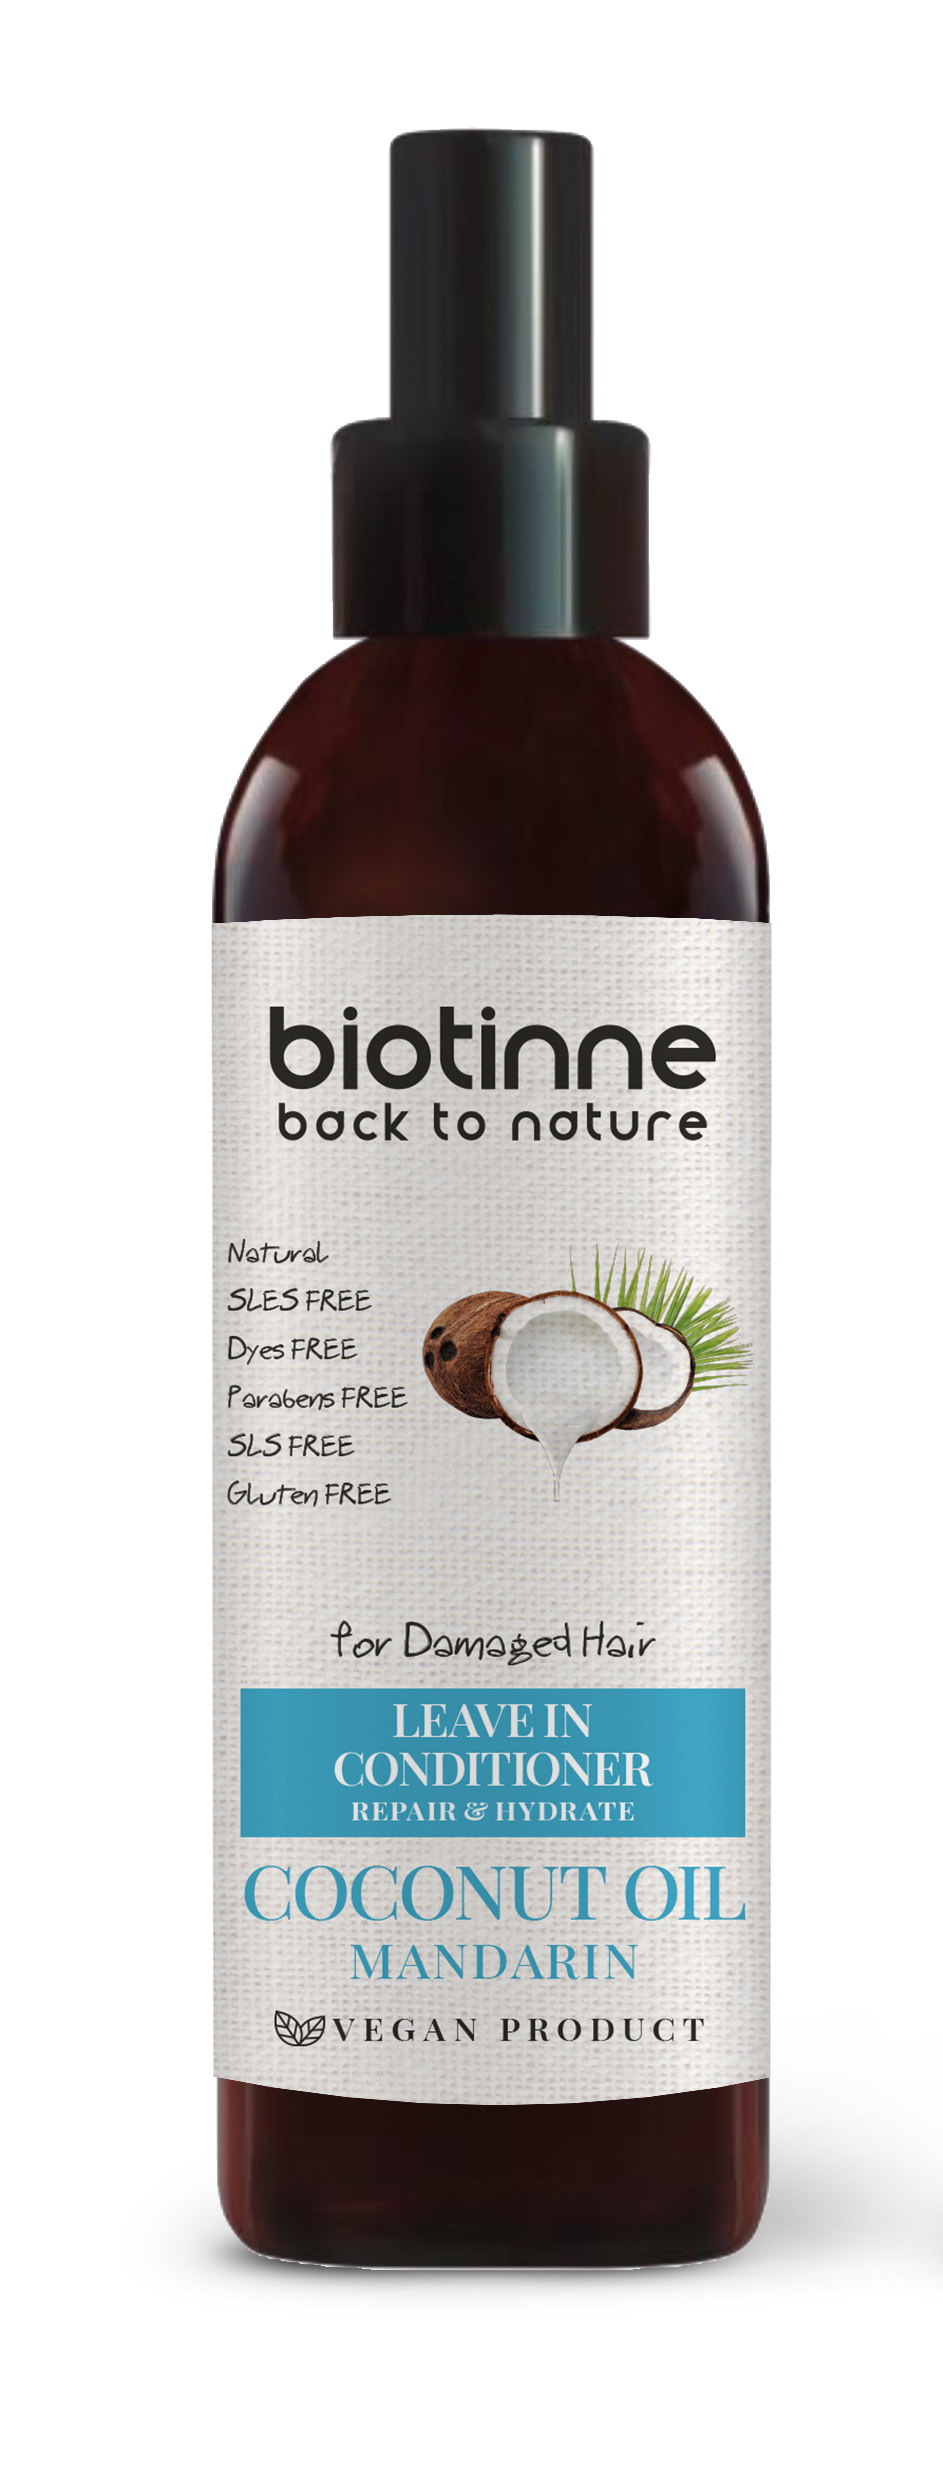 Coconut Oil & Mandarin - Leave in conditioner for damaged hair - 150 ml